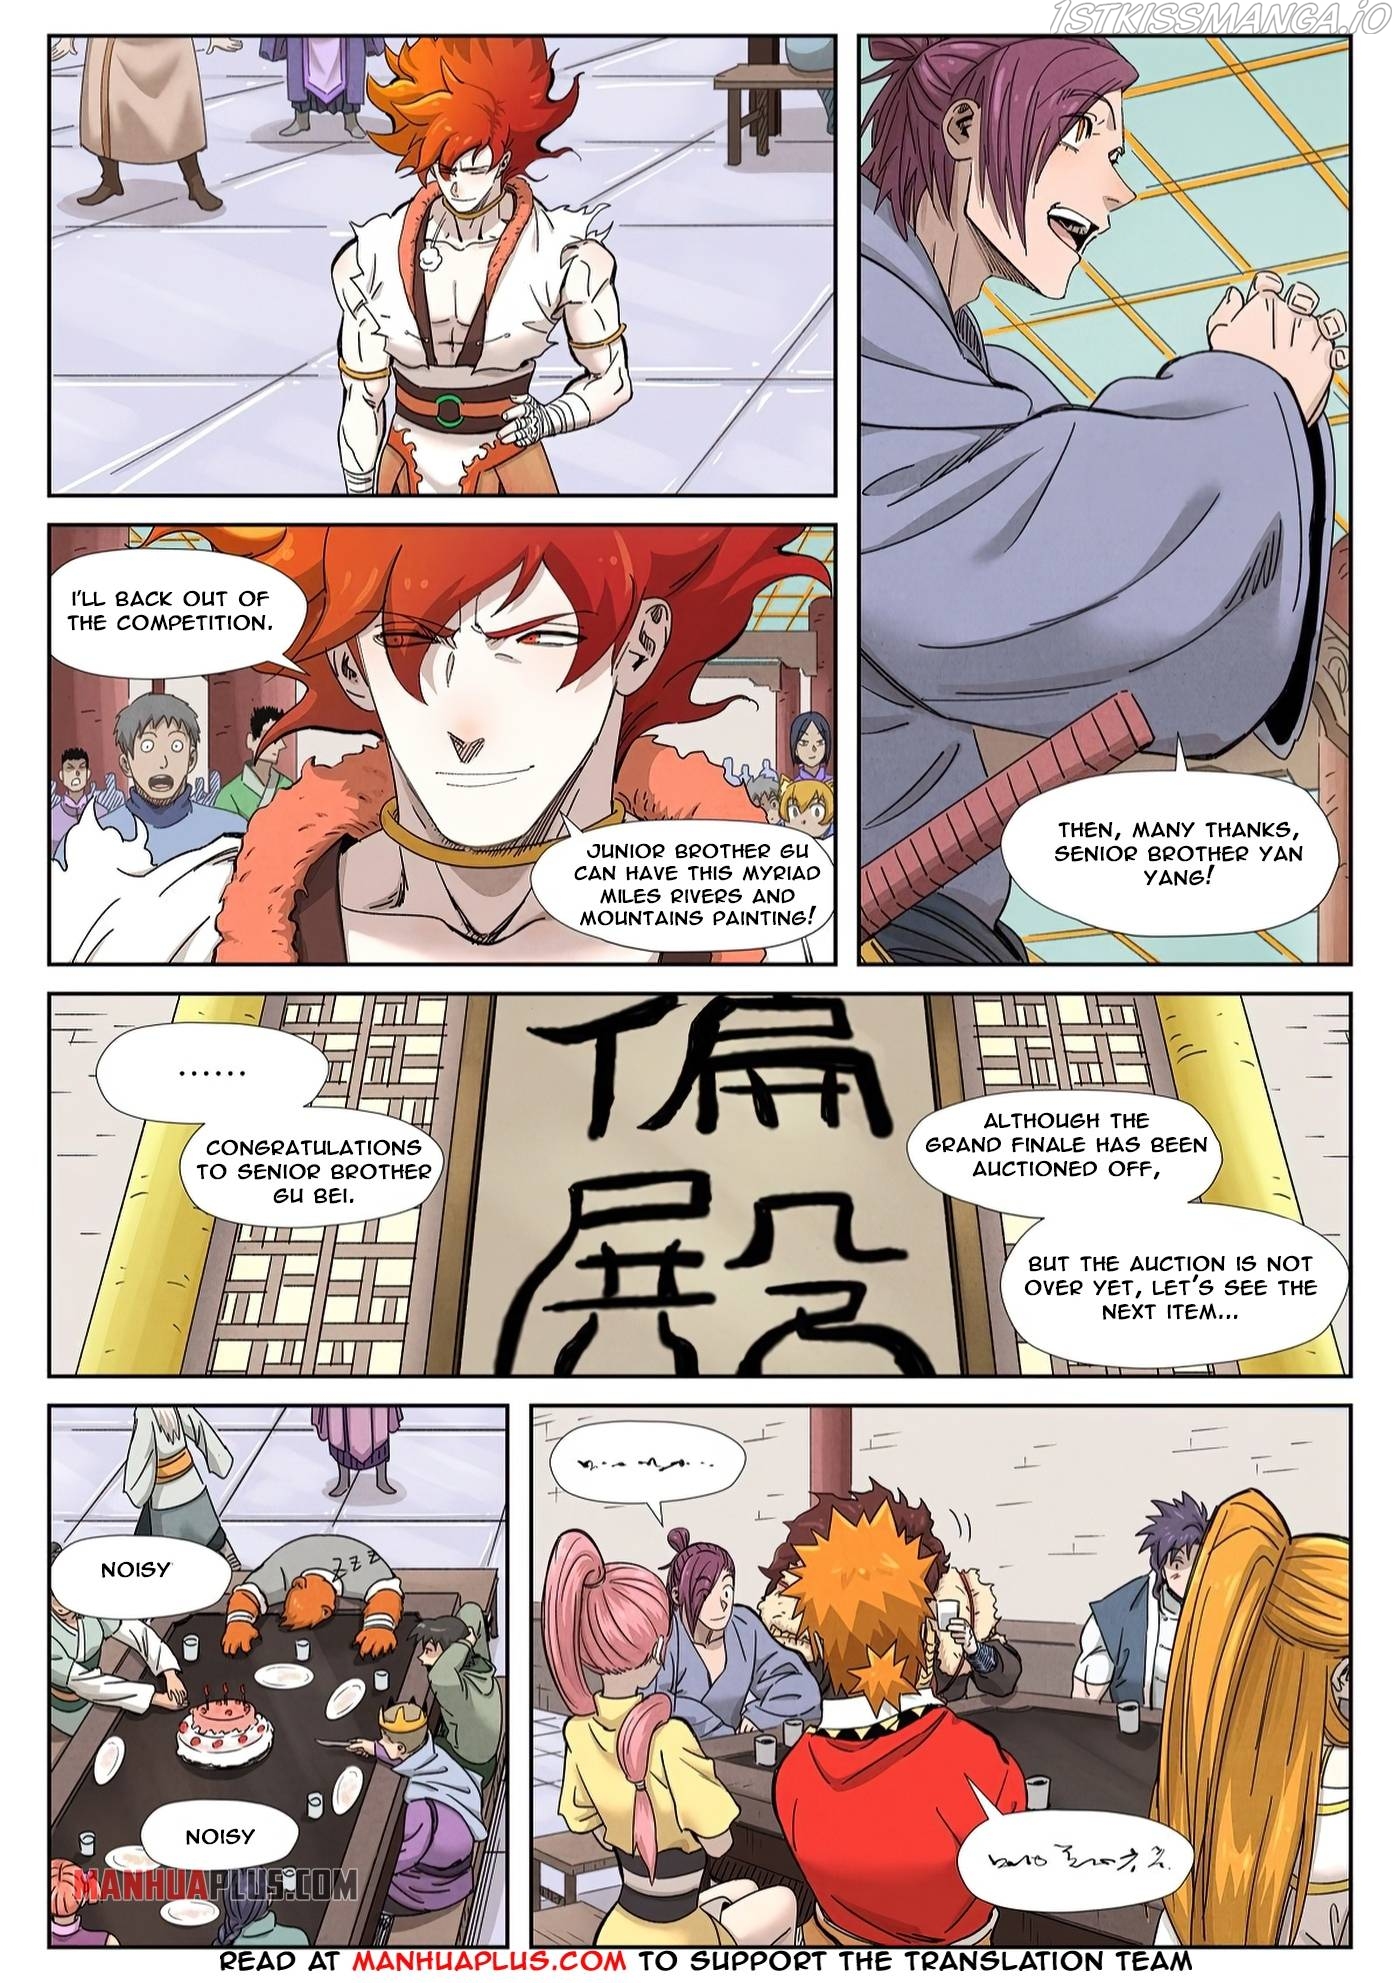 Tales of Demons and Gods Manhua Chapter 339.1 - Page 4